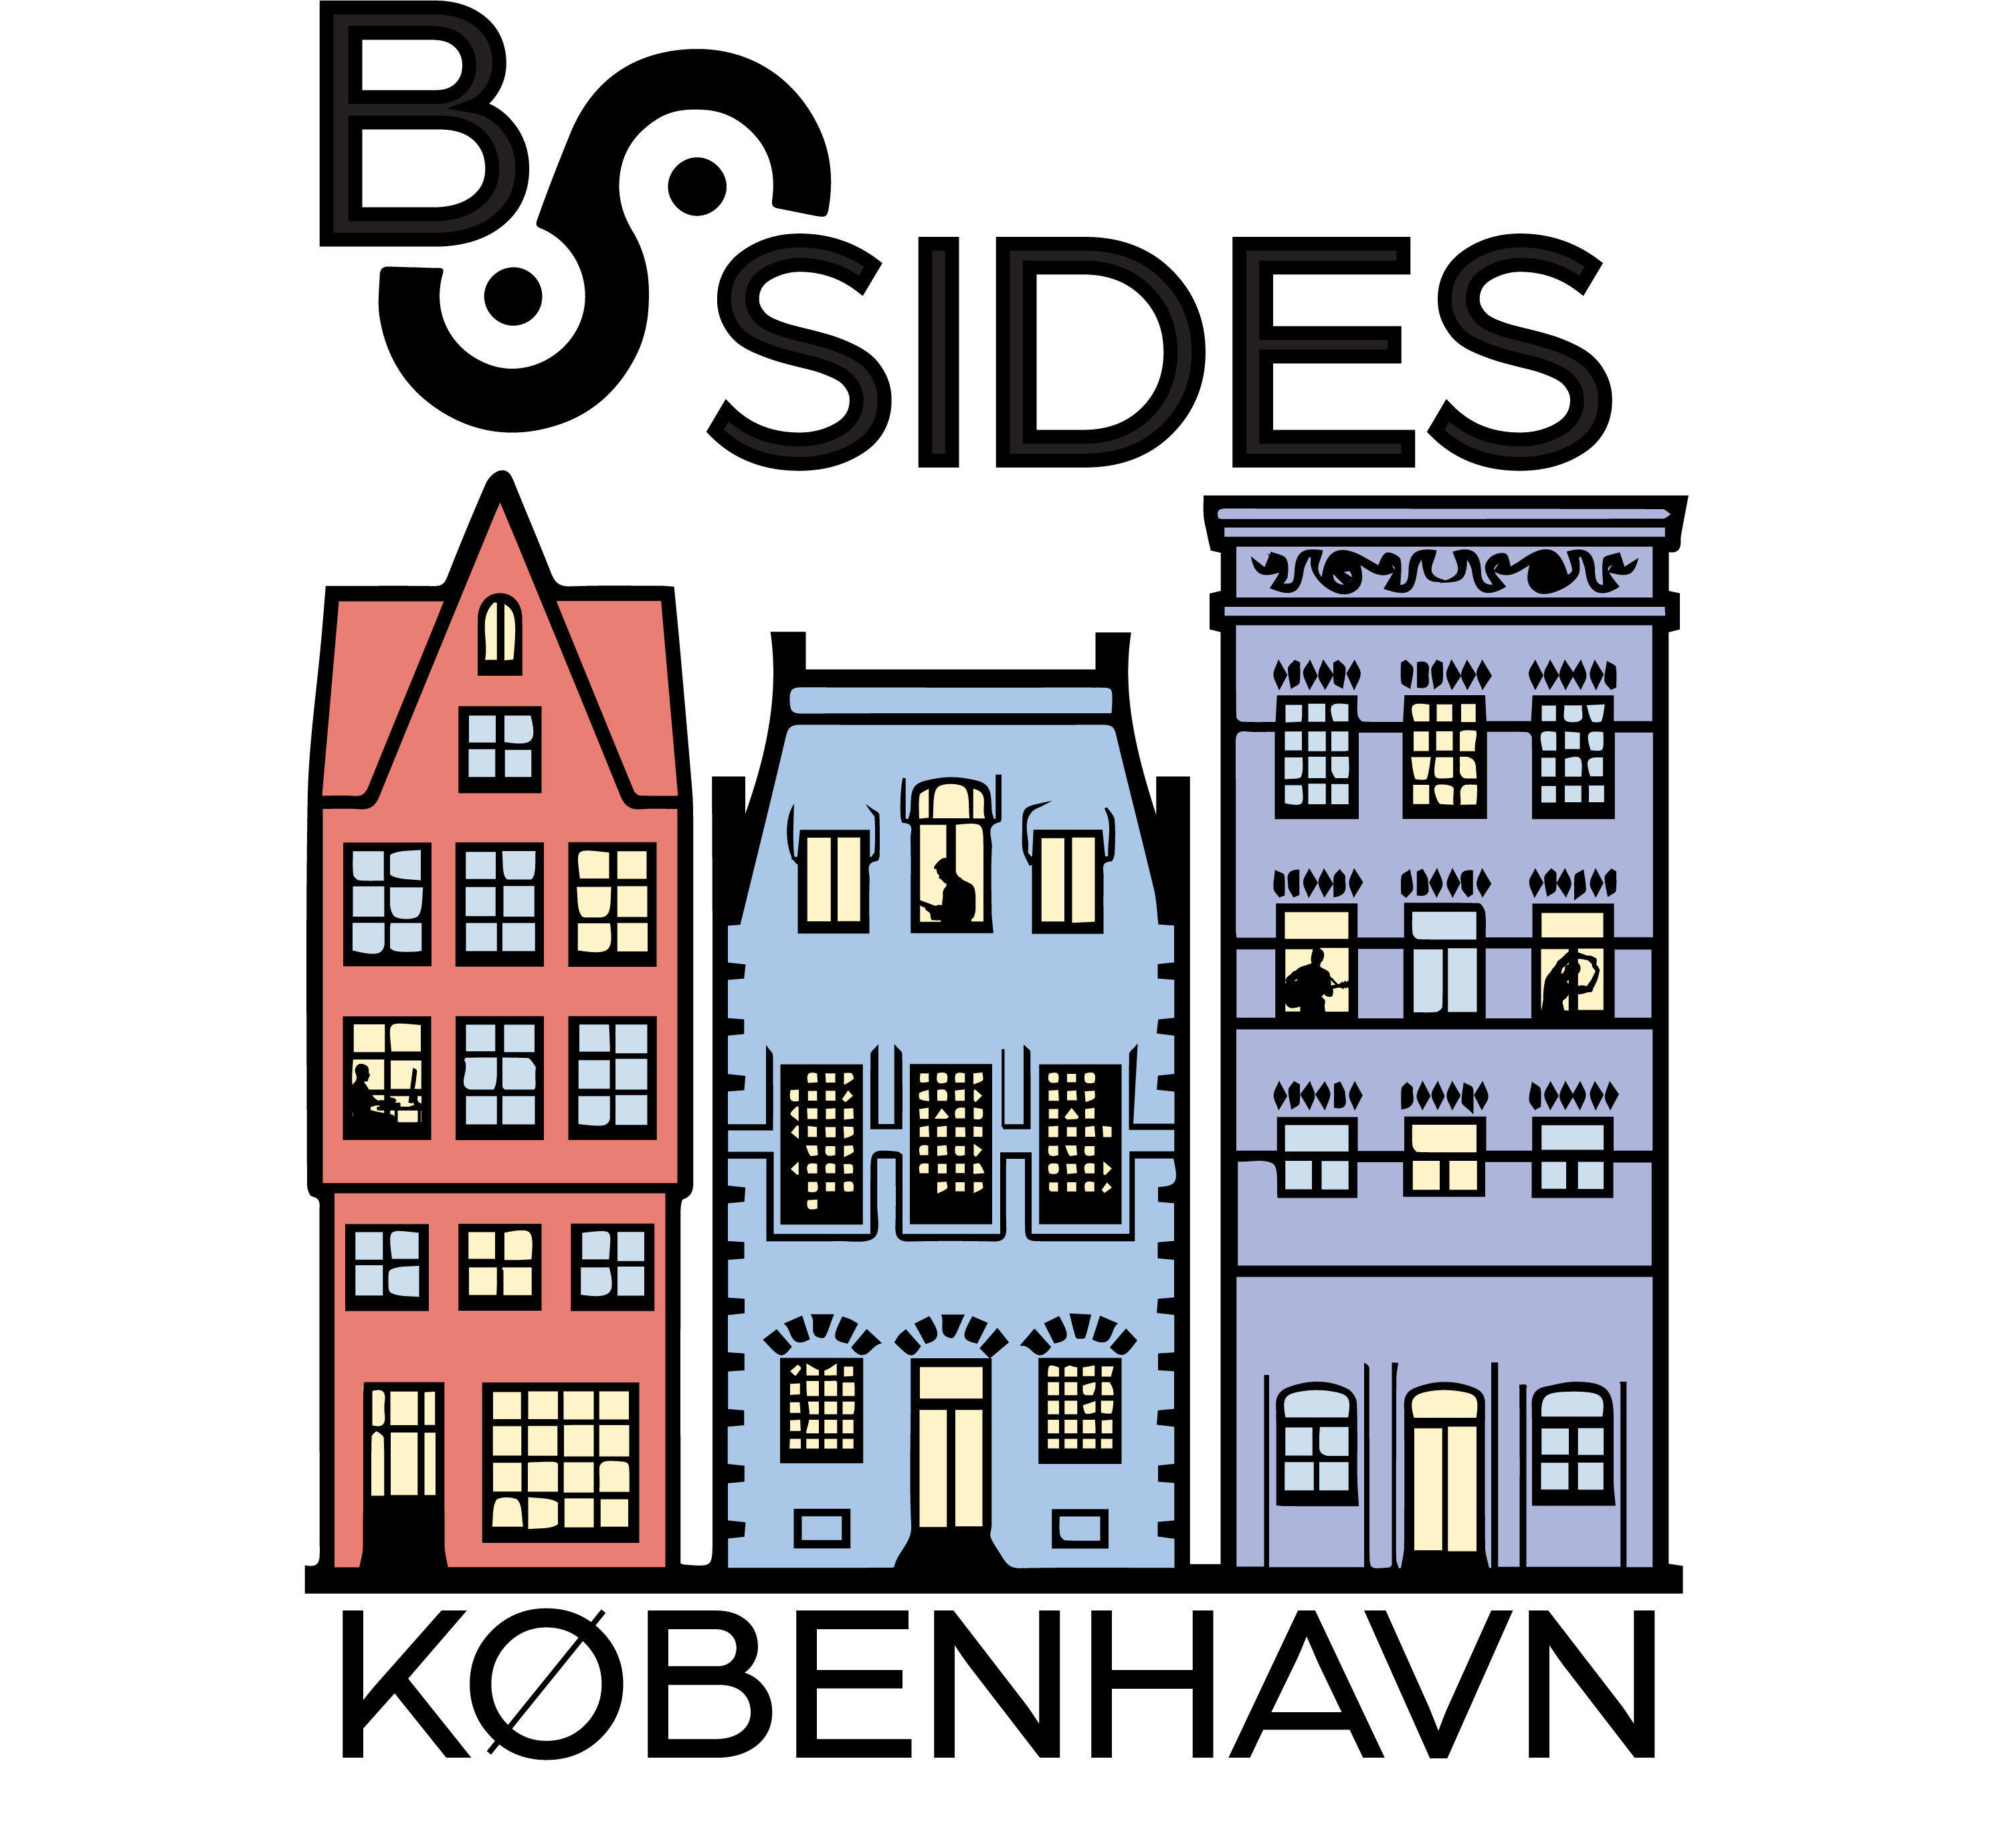 BSides København 2021 will take place on September 17-18 2021 - The CFP is now open!